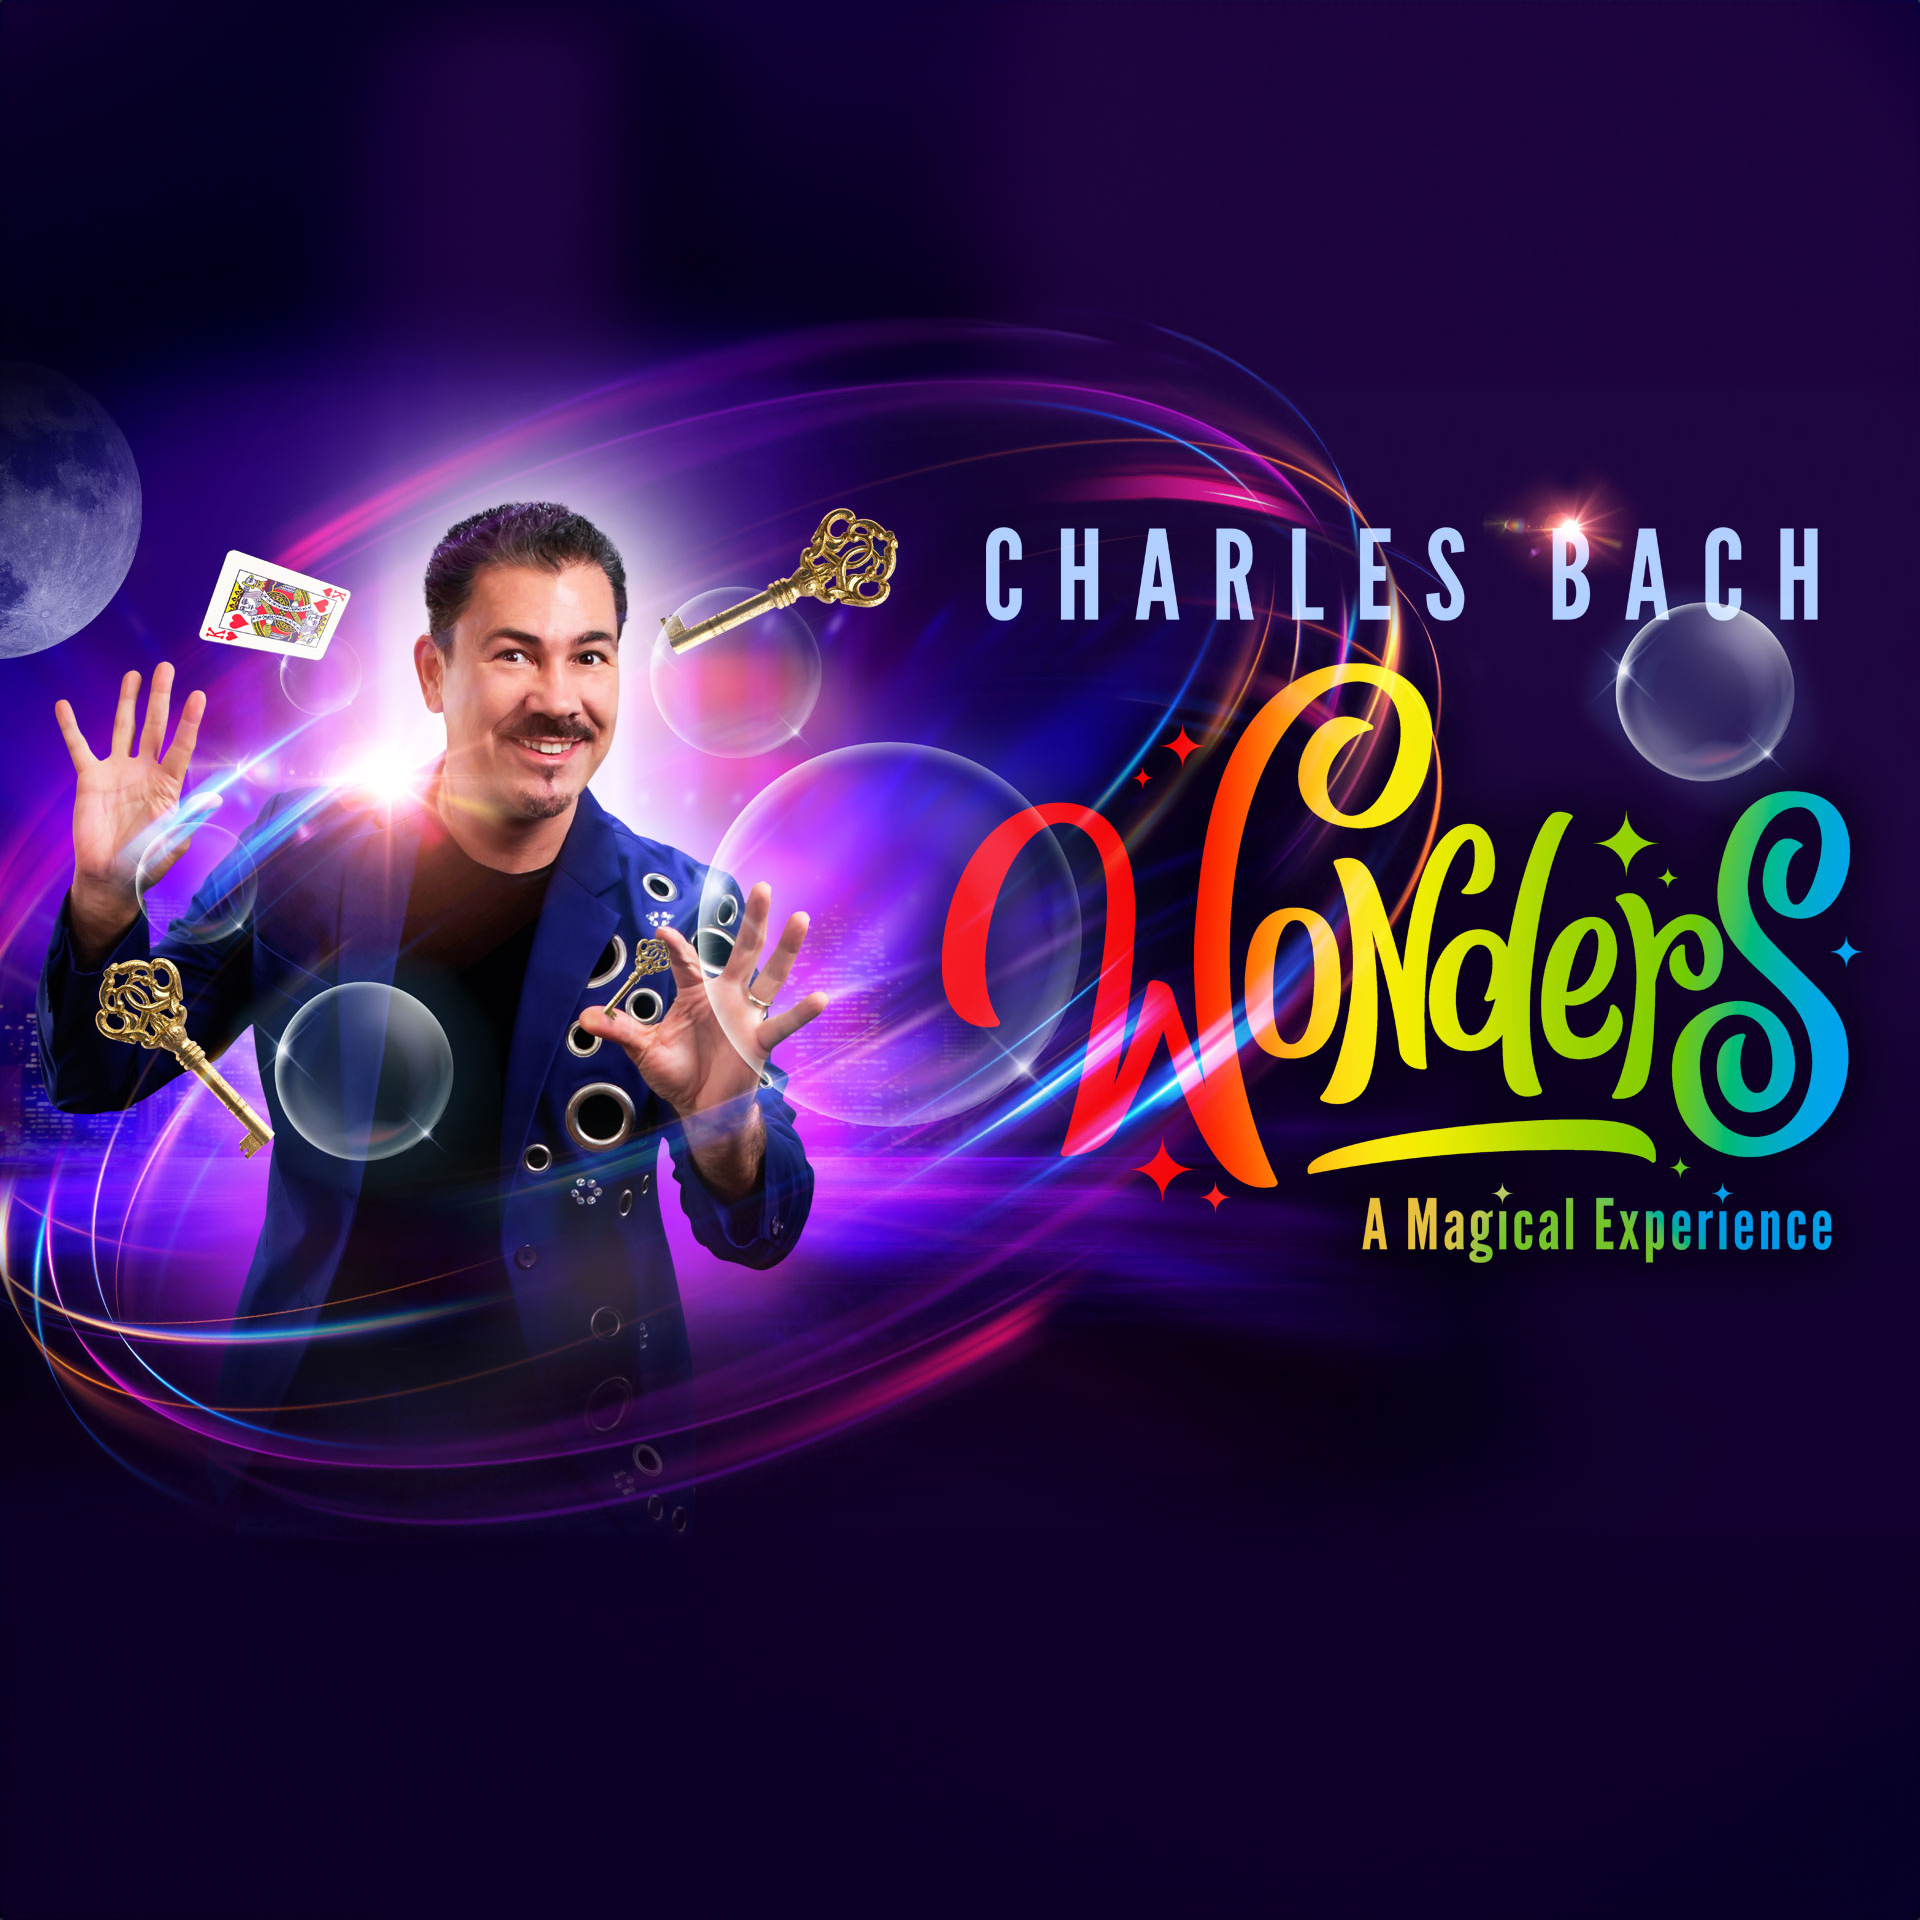 Ticket To Charles Bach Wonders Magic Show